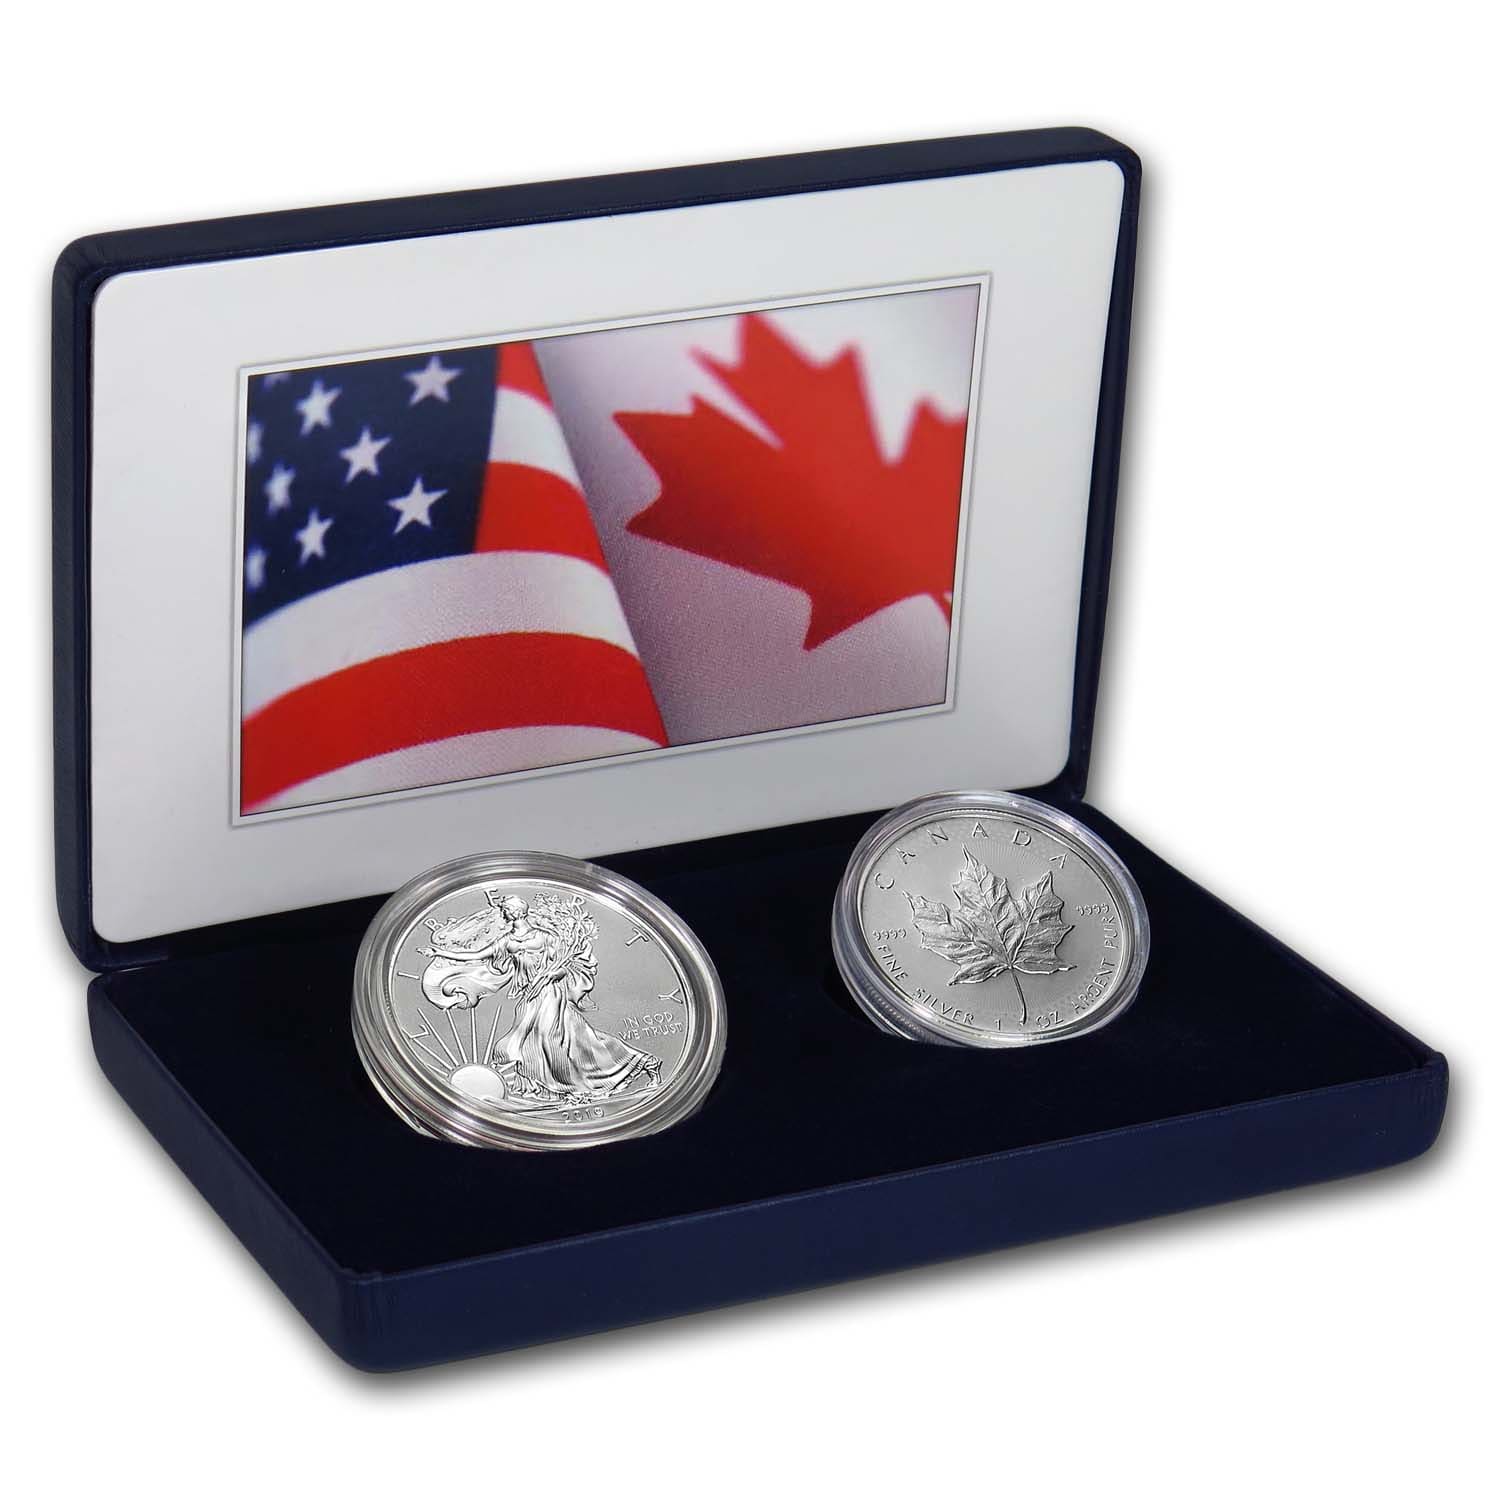 Buy 2019 U.S. Mint Pride of Two Nations Limited Edition 2-Coin Set